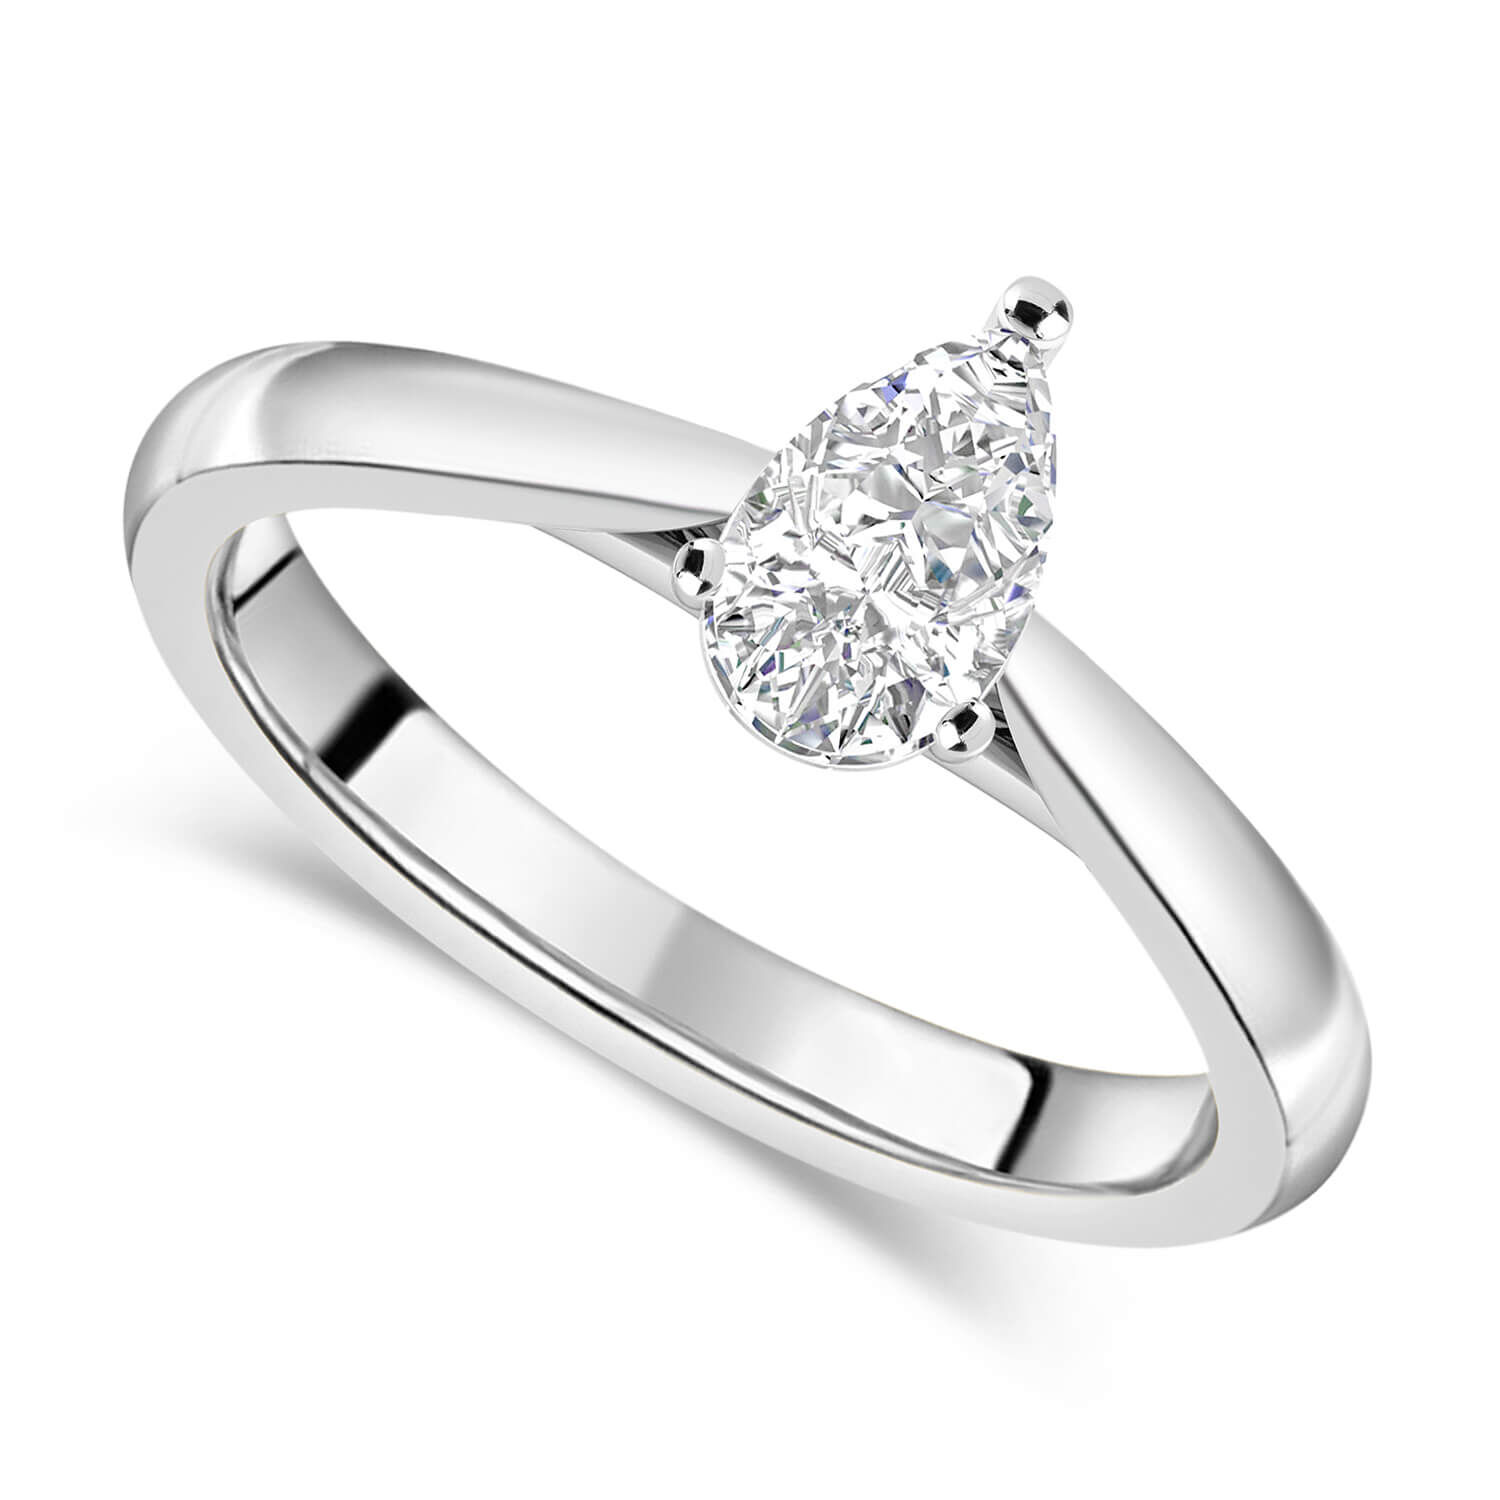 Northern Star 0.80ct Diamond Shoulders 18ct White Gold Ring at Fraser Hart